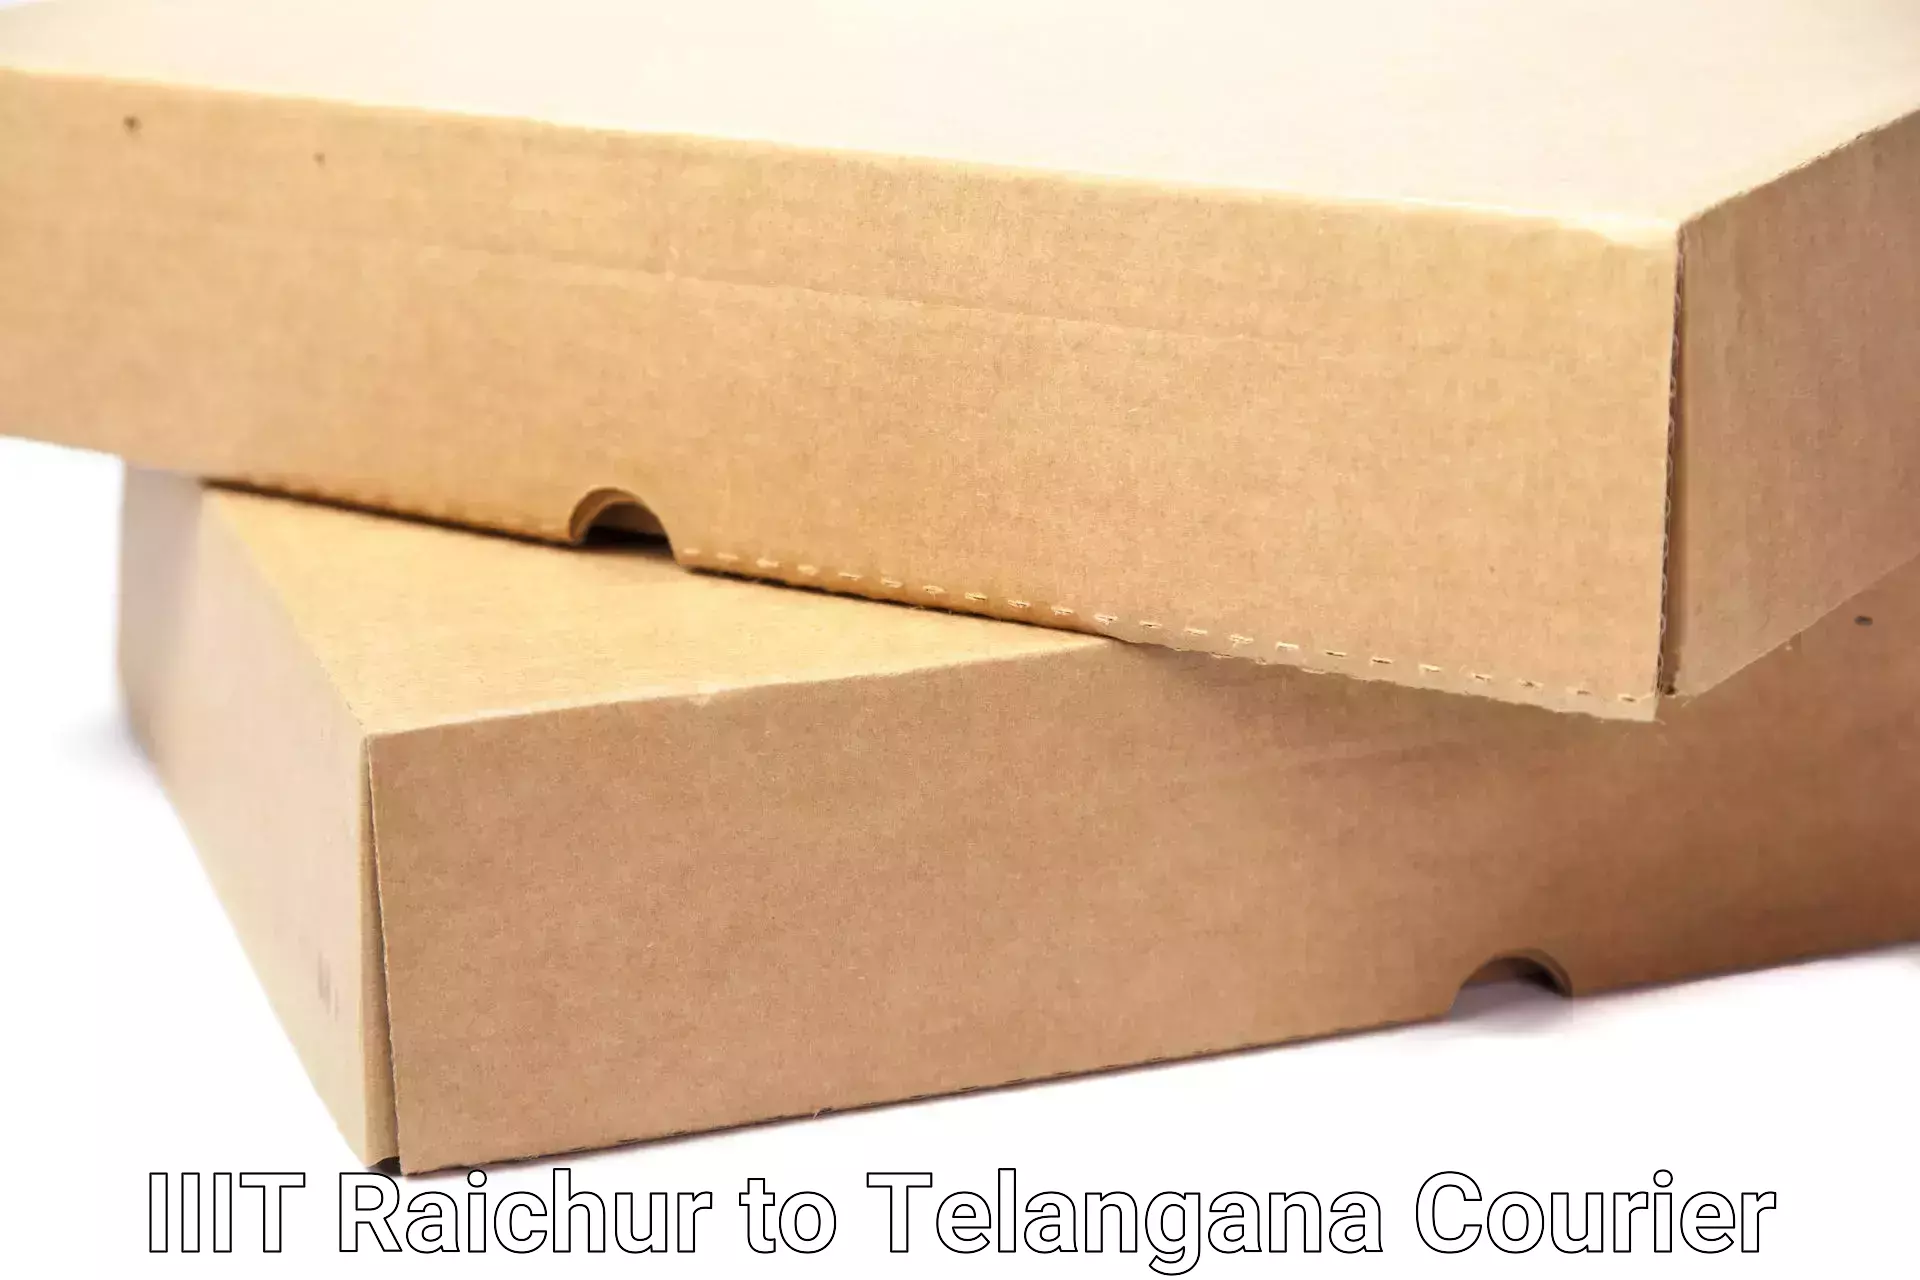 Quality relocation services IIIT Raichur to Jogipet